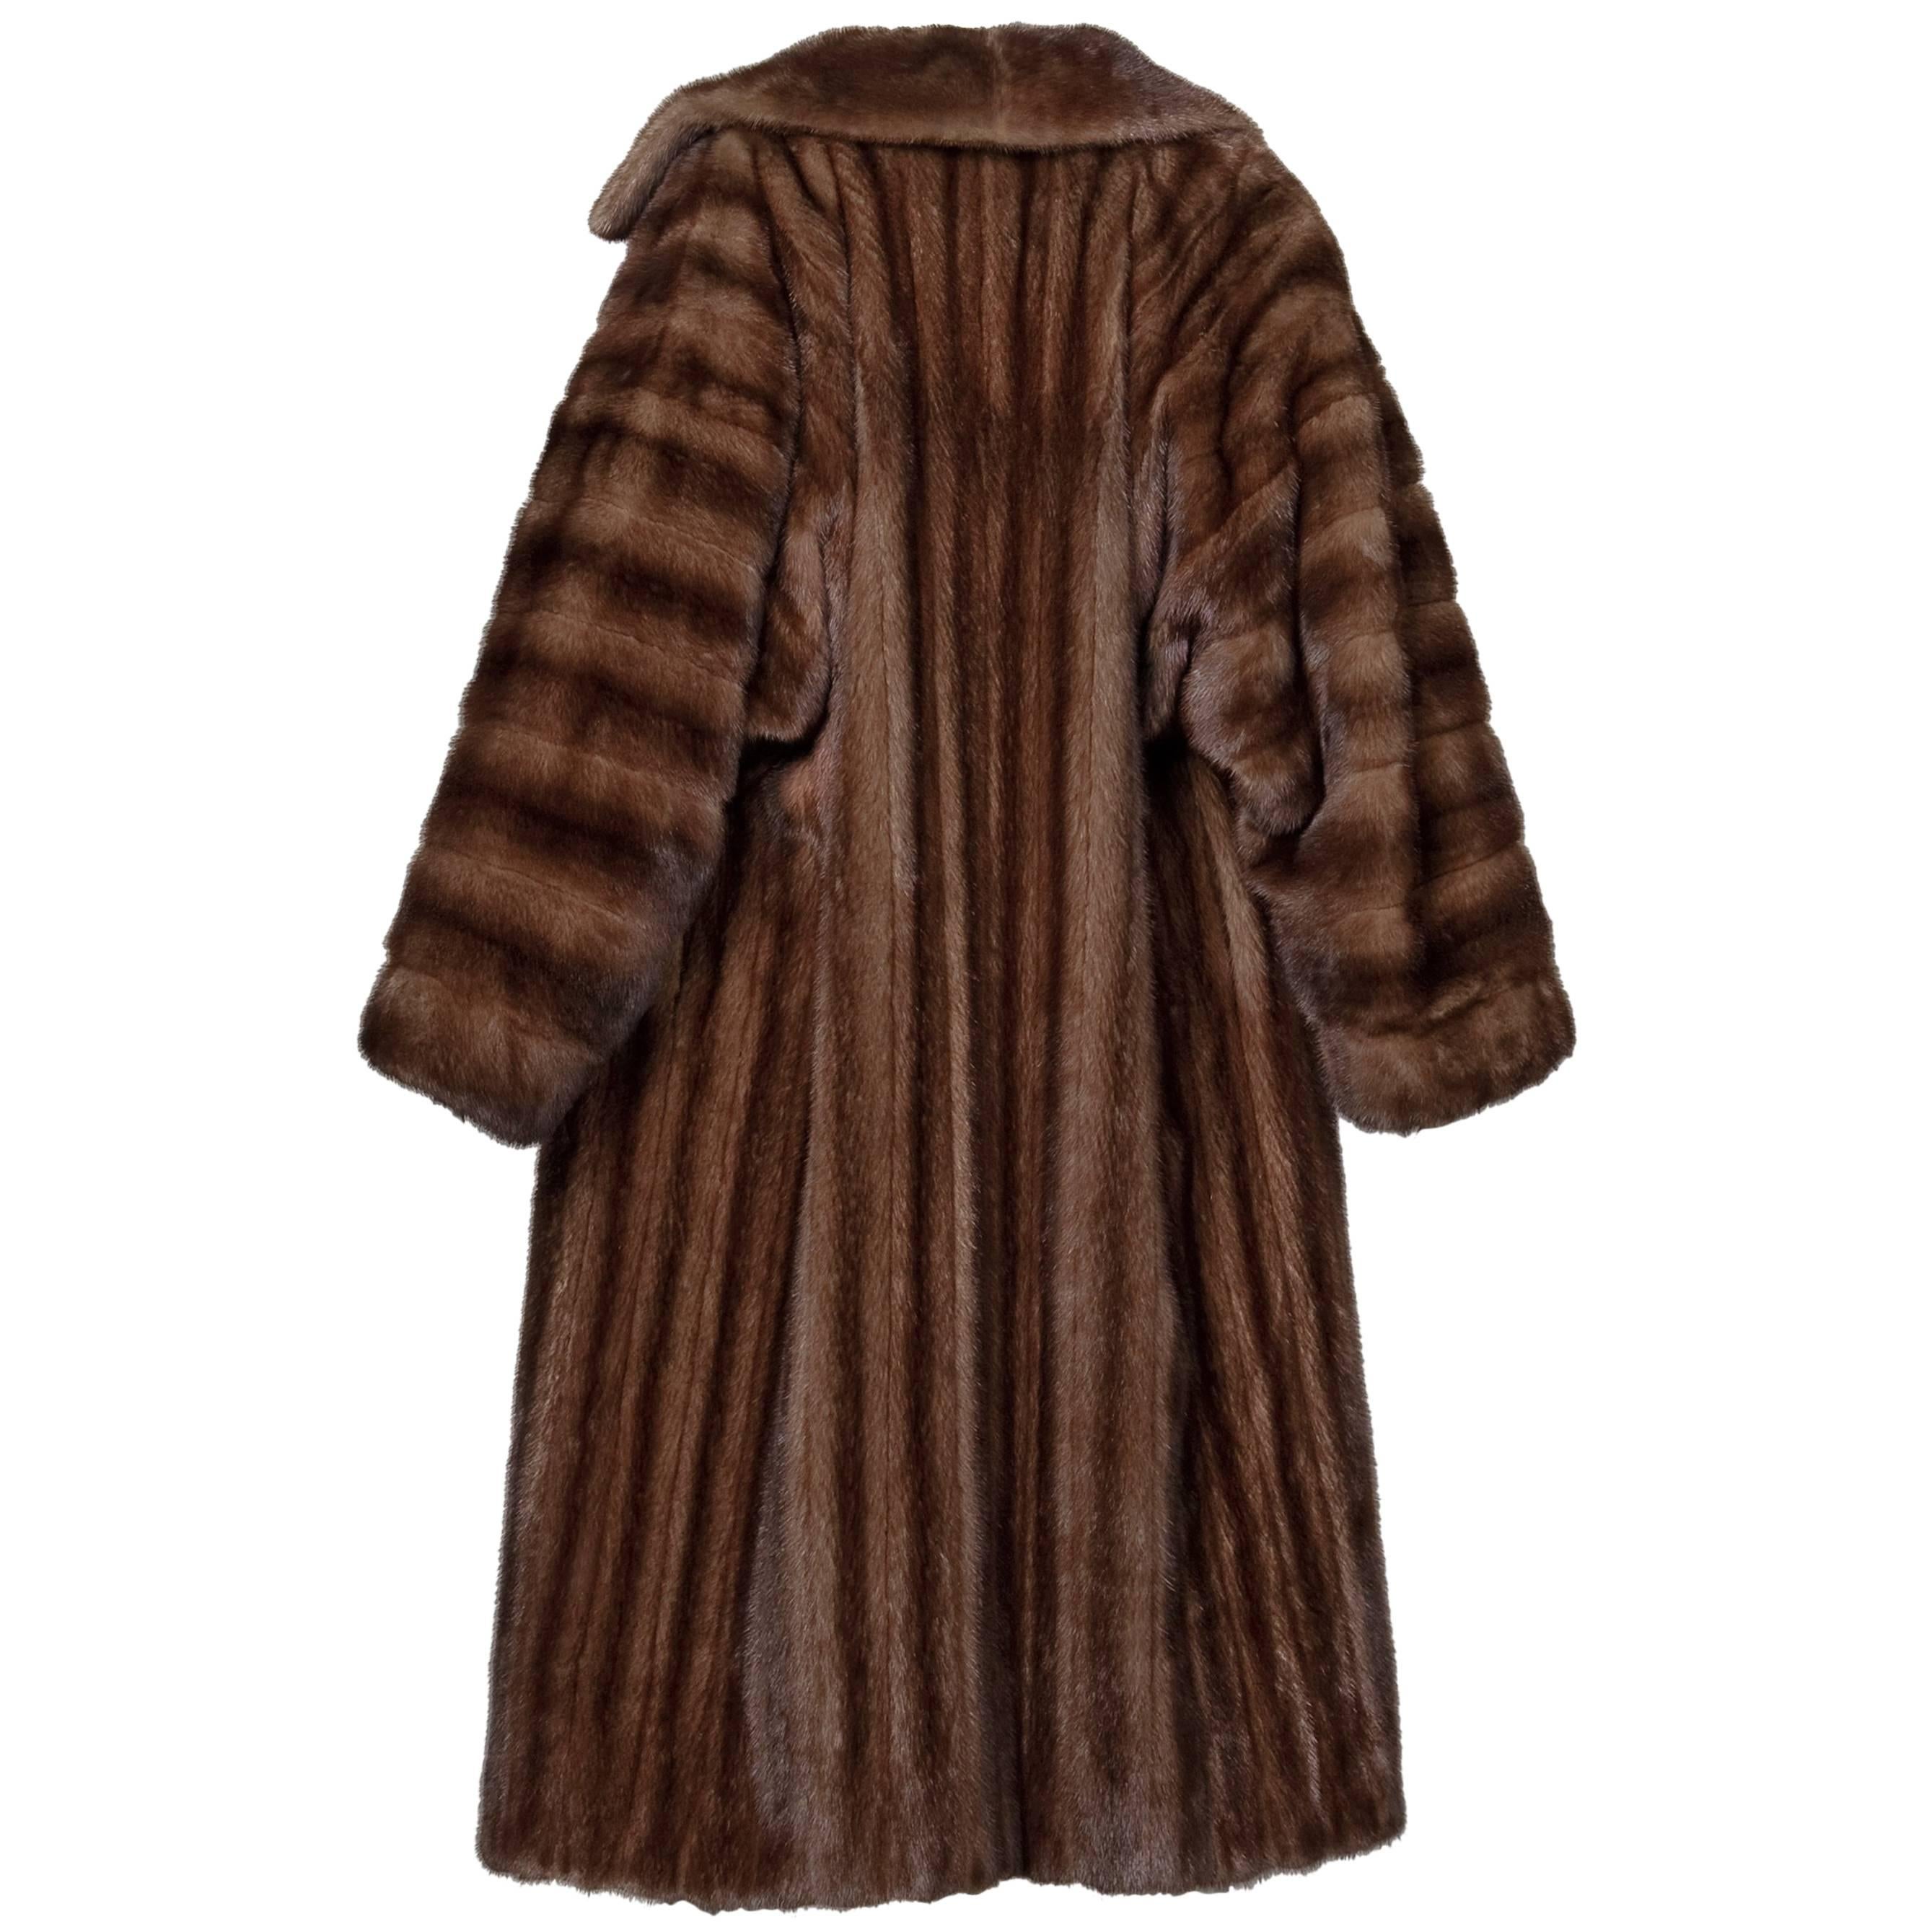 Absolutely spectacular vintage coat by James Galanos for Neiman-Marcus. At the time this was made, Galanos fur was the most expensive fur sold in the US.  Stunning mahogany female mink fur is in excellent condition and was always stored in cold